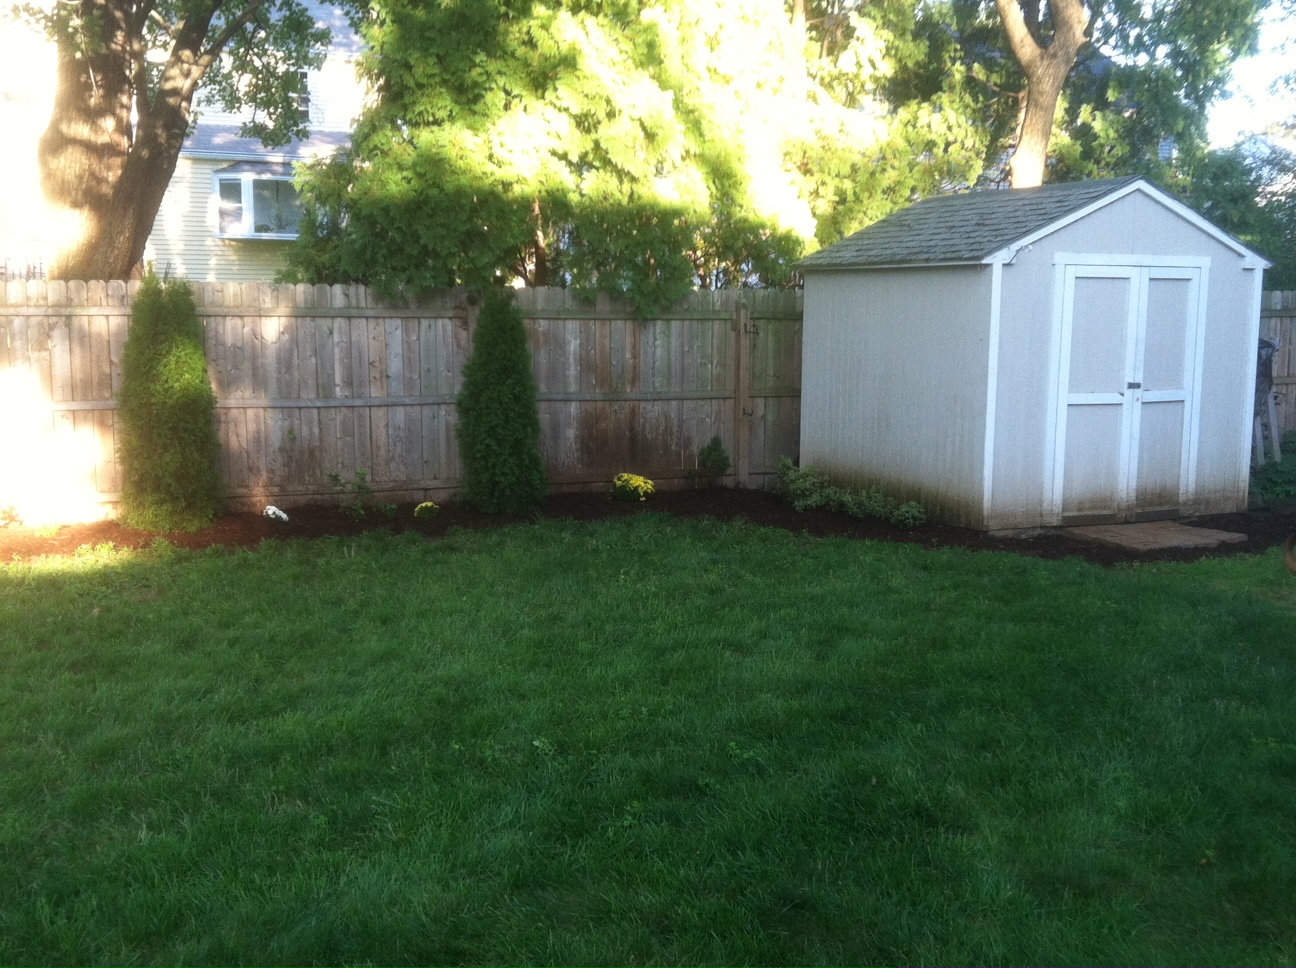 The Room Stylist: Our Backyard Landscaping Update